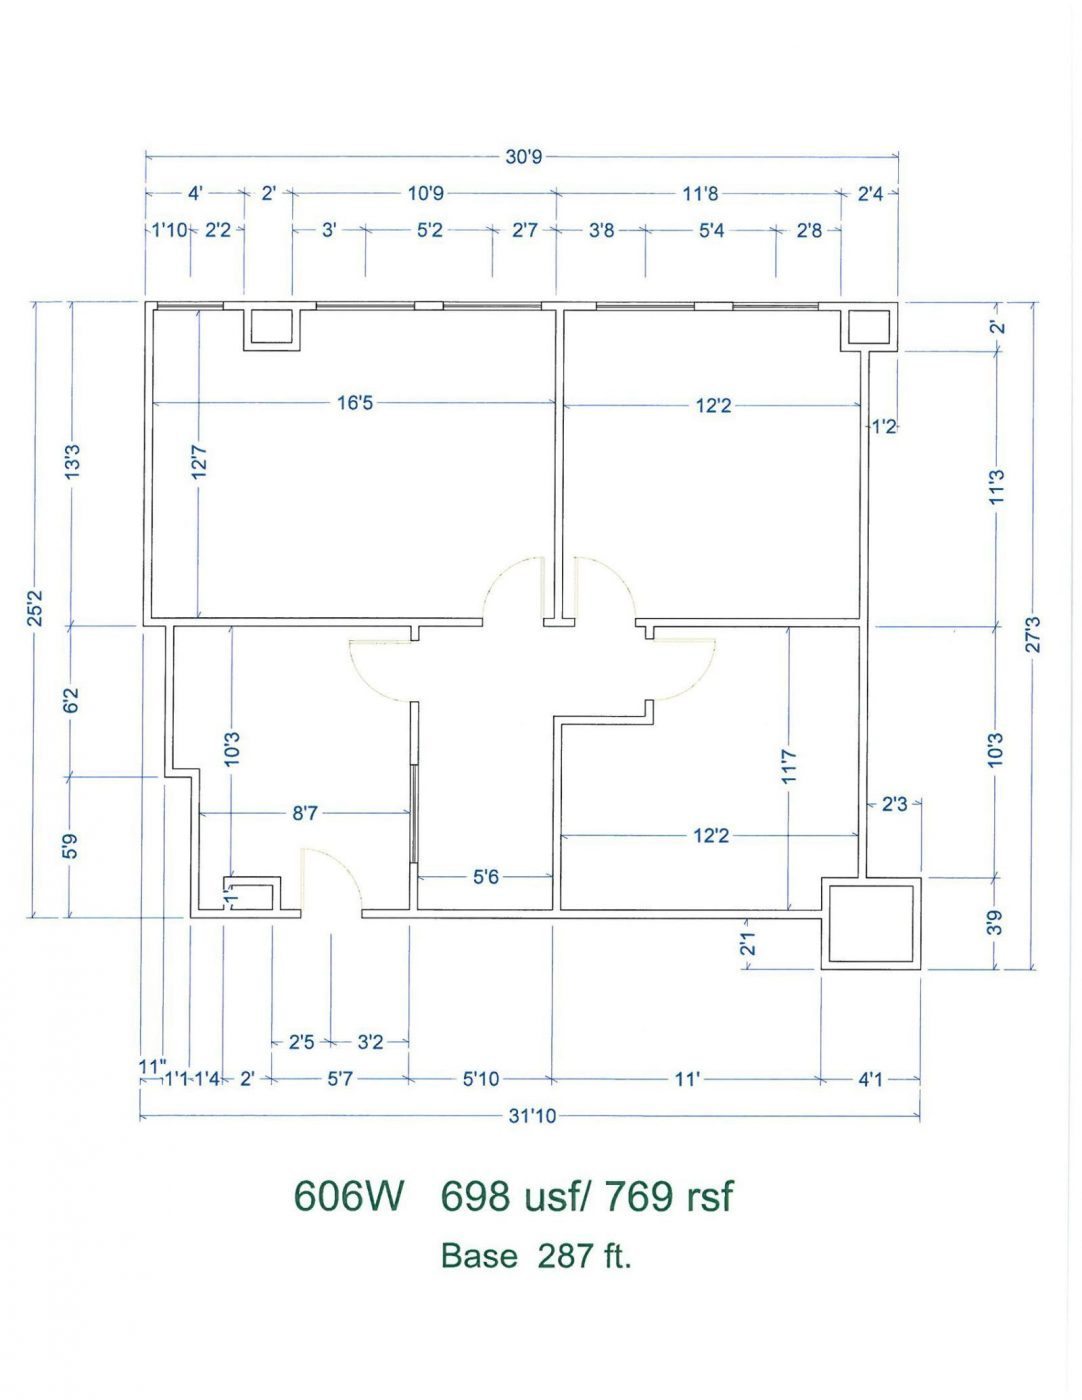 Floor Plan for unit 606W at 15565 Northland Dr Southfield, MI 48075